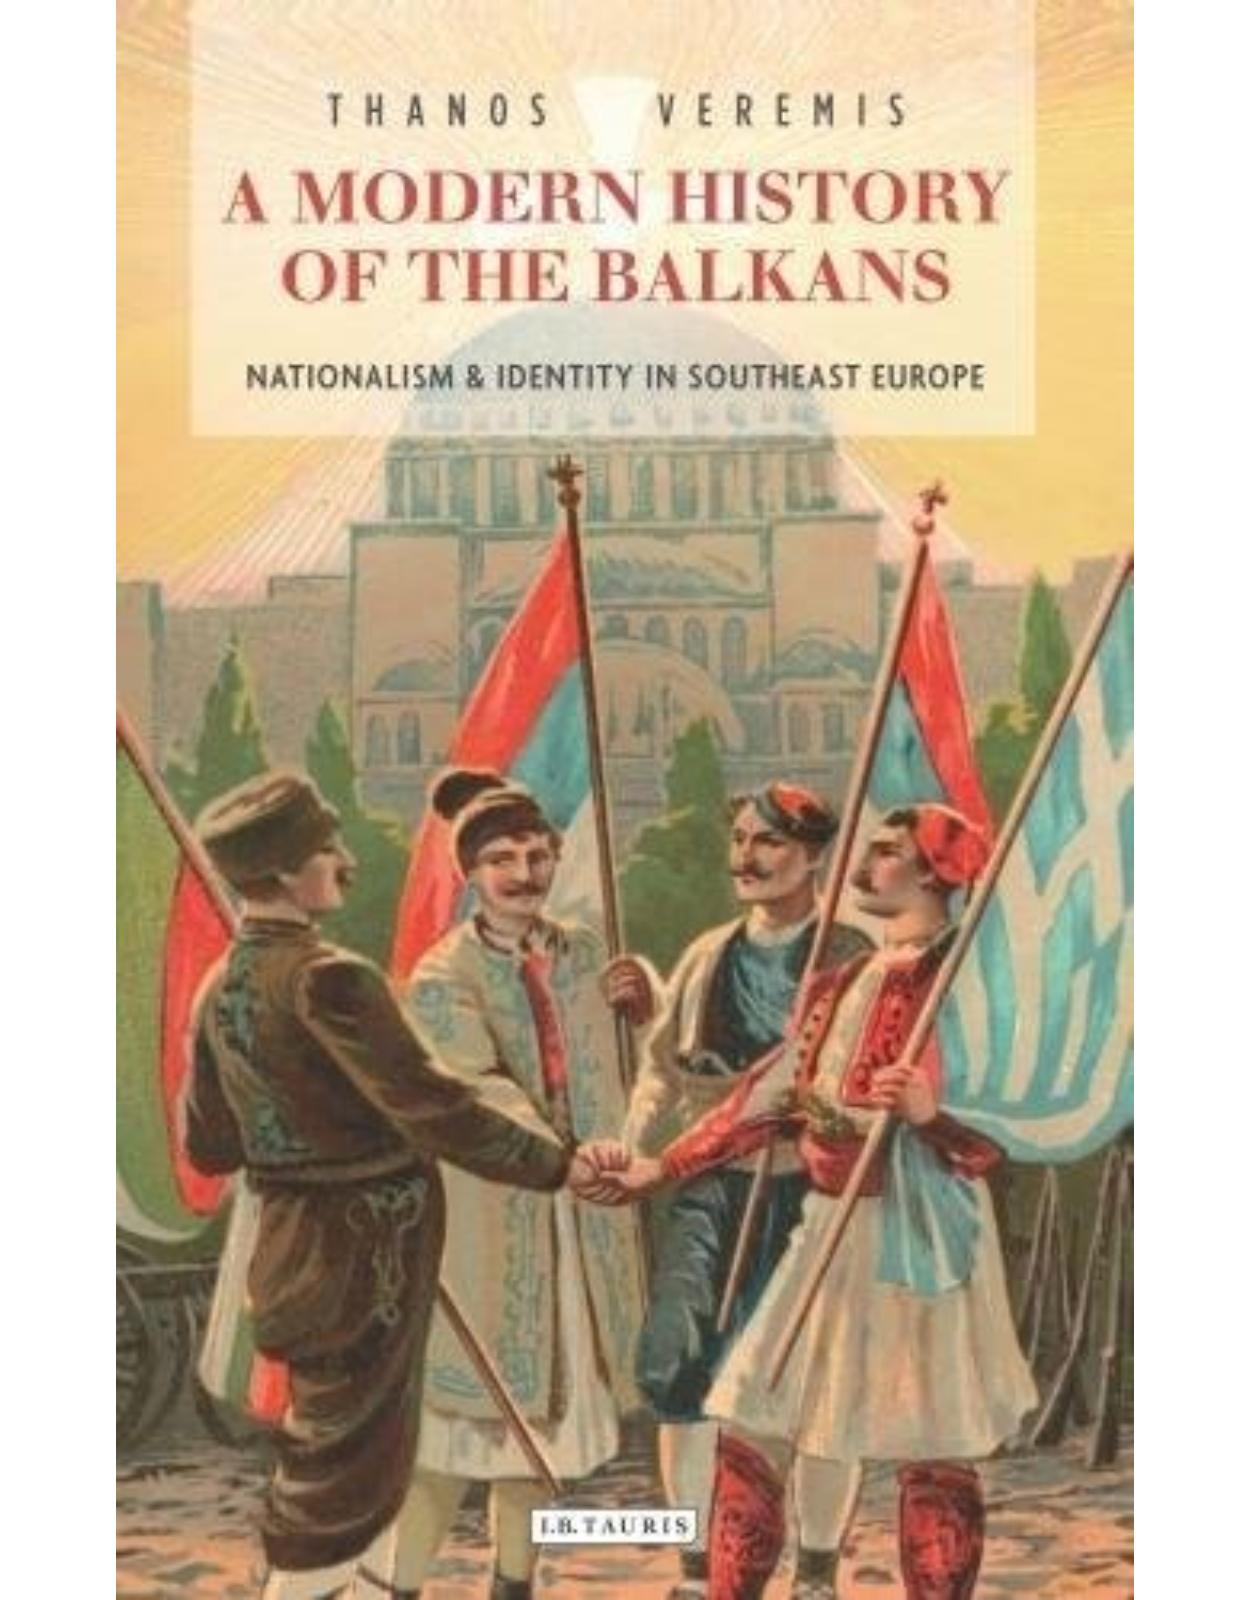 A Modern History of the Balkans: Nationalism and Identity in Southeast Europe (Library of Balkan Studies)